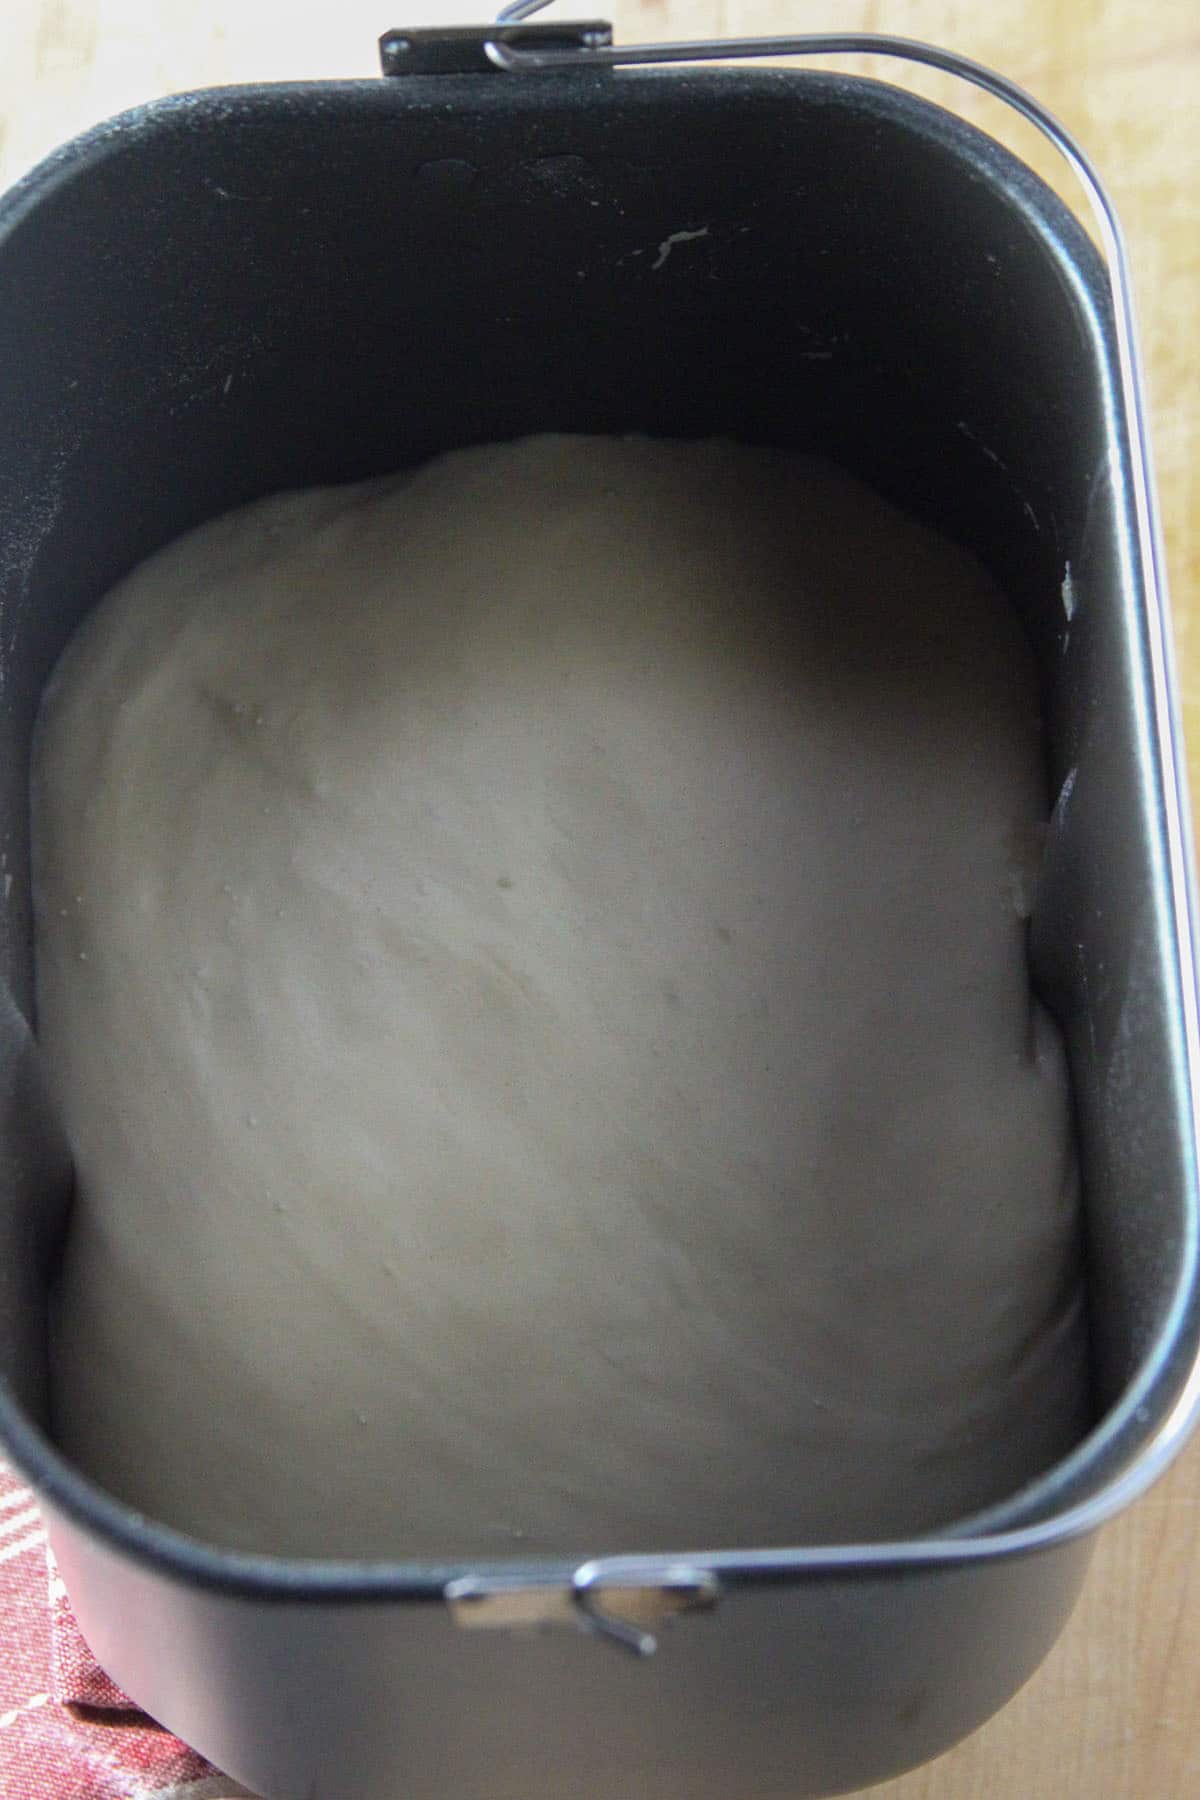 The risen pandesal dough on the bread machine.